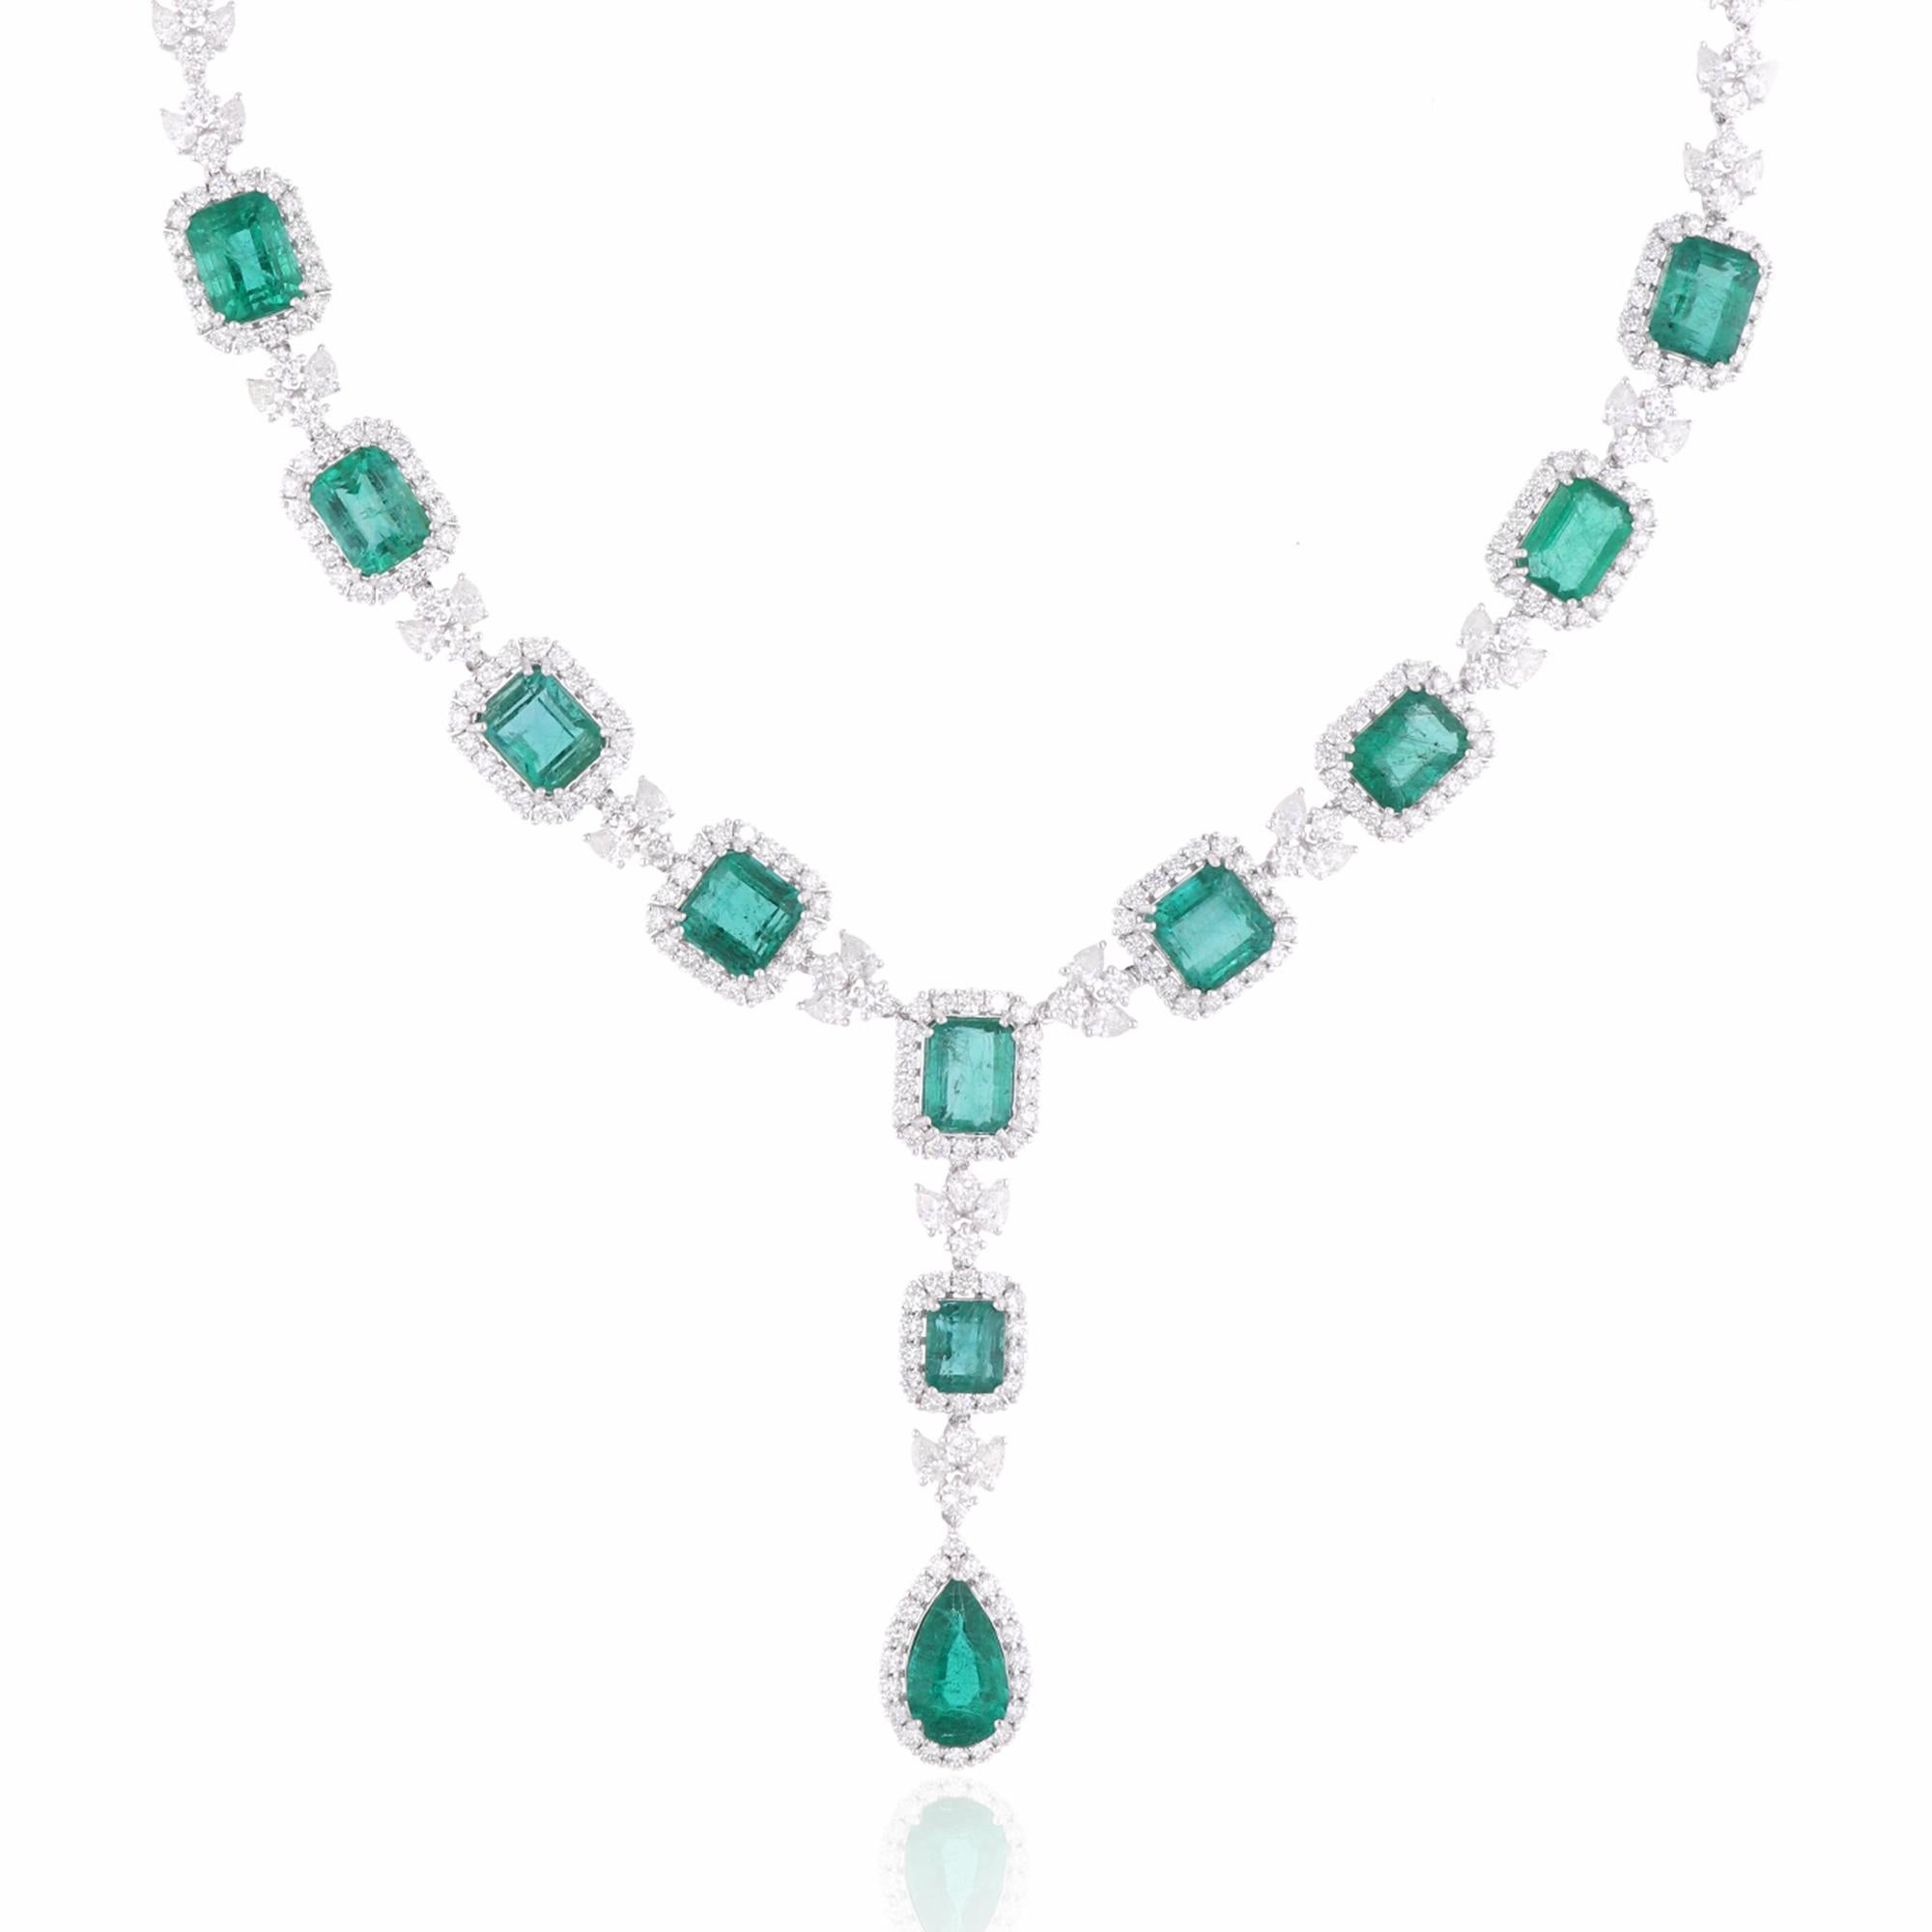 Item Code :- SEN-51287
Gross Wt. :- 46.36 gm
18k White Gold Wt. :- 37.70 gm
Natural Diamond Wt. :- 12.35 Ct. ( AVERAGE DIAMOND CLARITY SI1-SI2 & COLOR H-I )
Emerald Wt. :- 30.94 Ct.
Necklace Length :- 16 Inches Long

✦